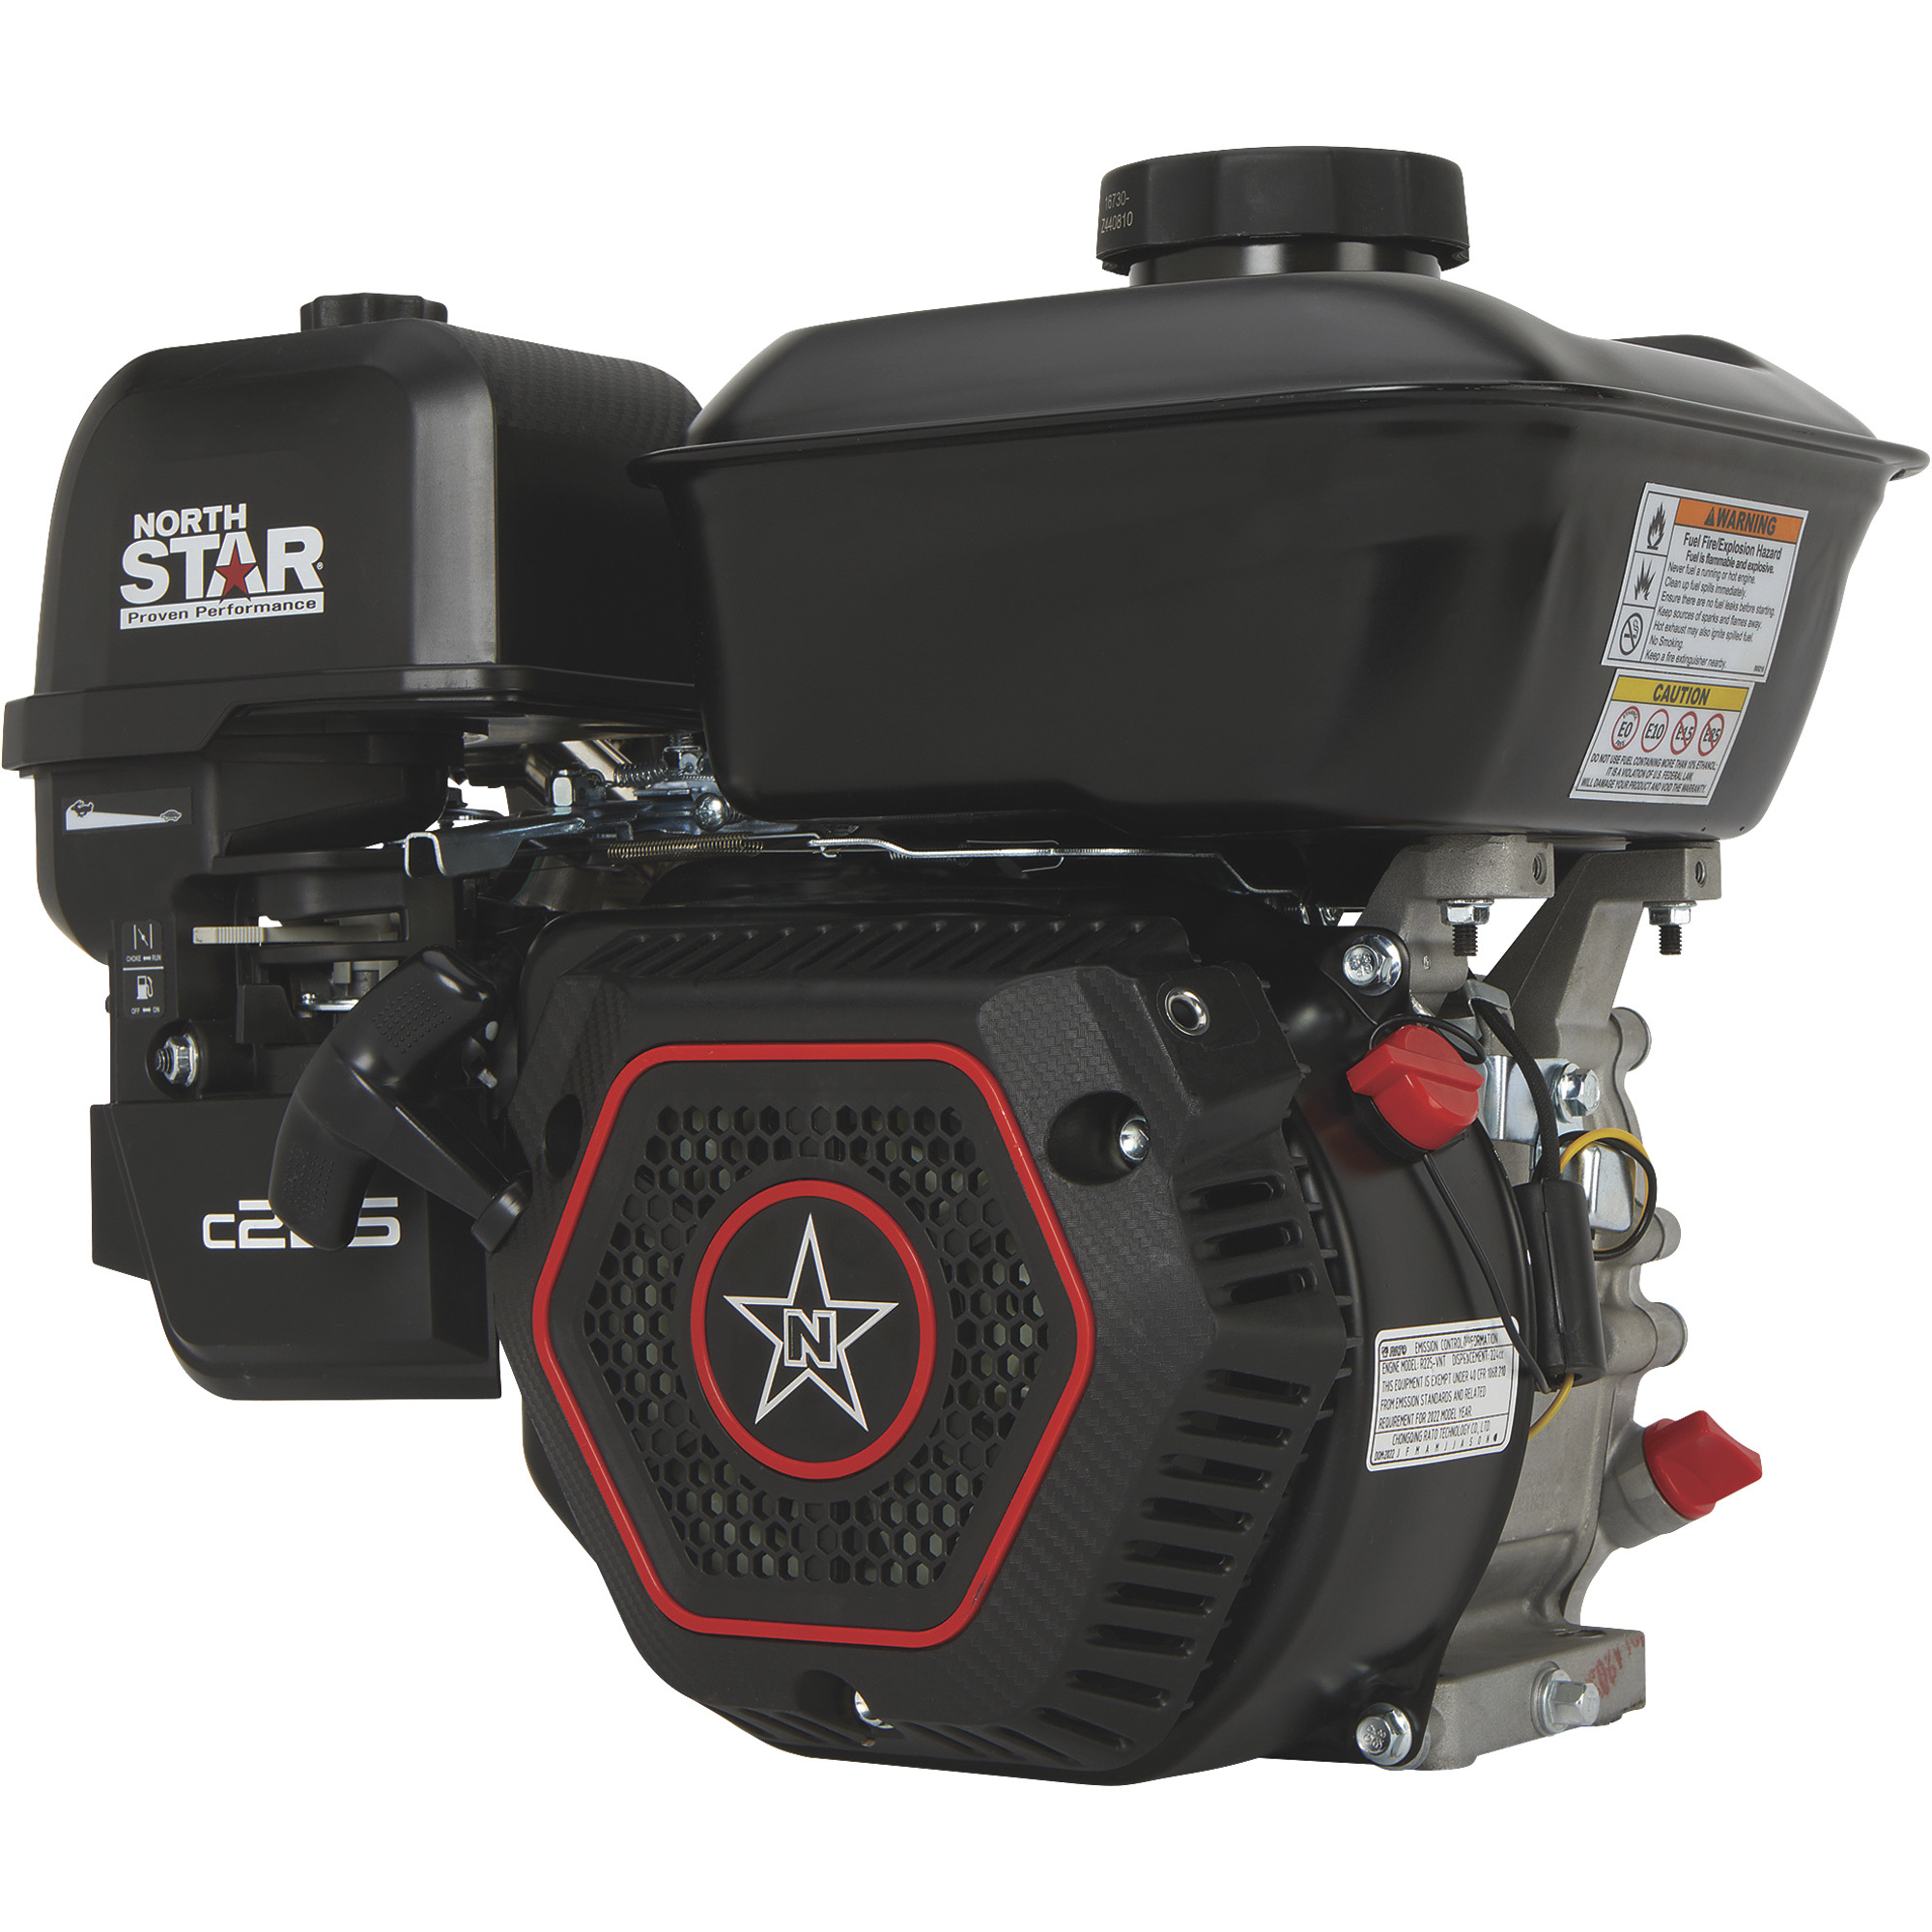 NorthStar c225 Horizontal OHV Engine with Recoil Start â 224cc, 3/4Inch x 2-7/16Inch Shaft